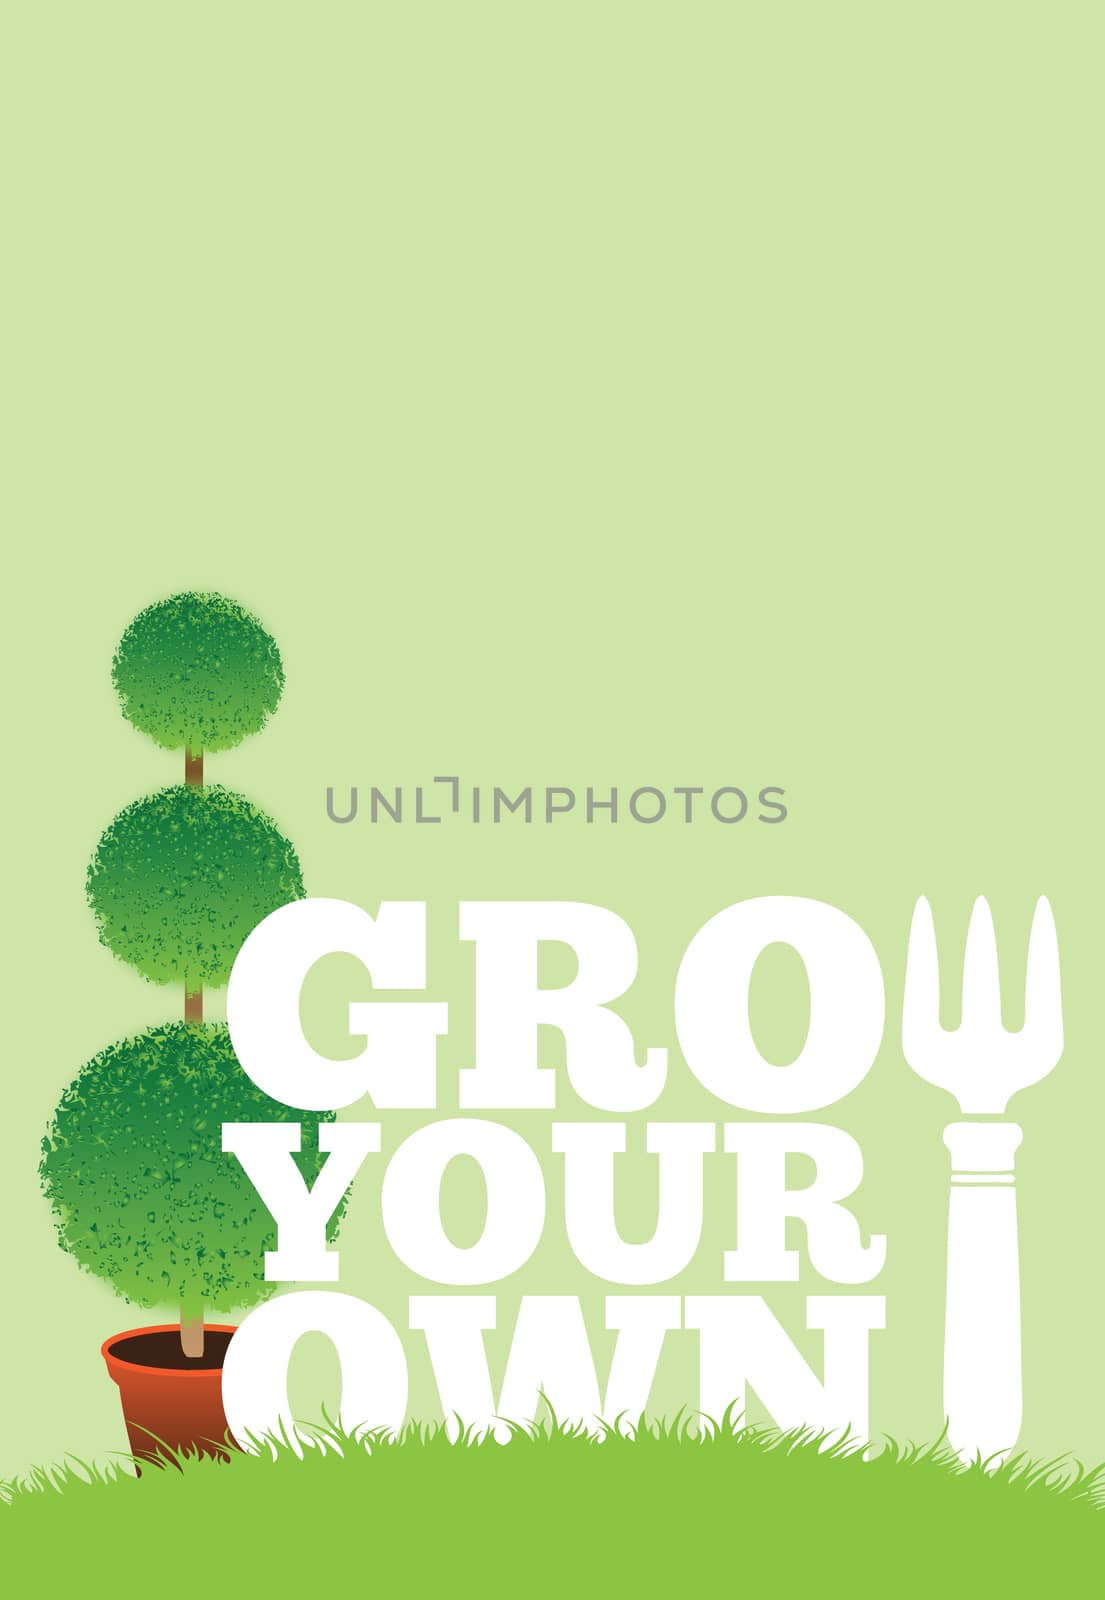 An illustration of a garden poster on a portrait format with the text Grow Your Own with a topiary tree behind.